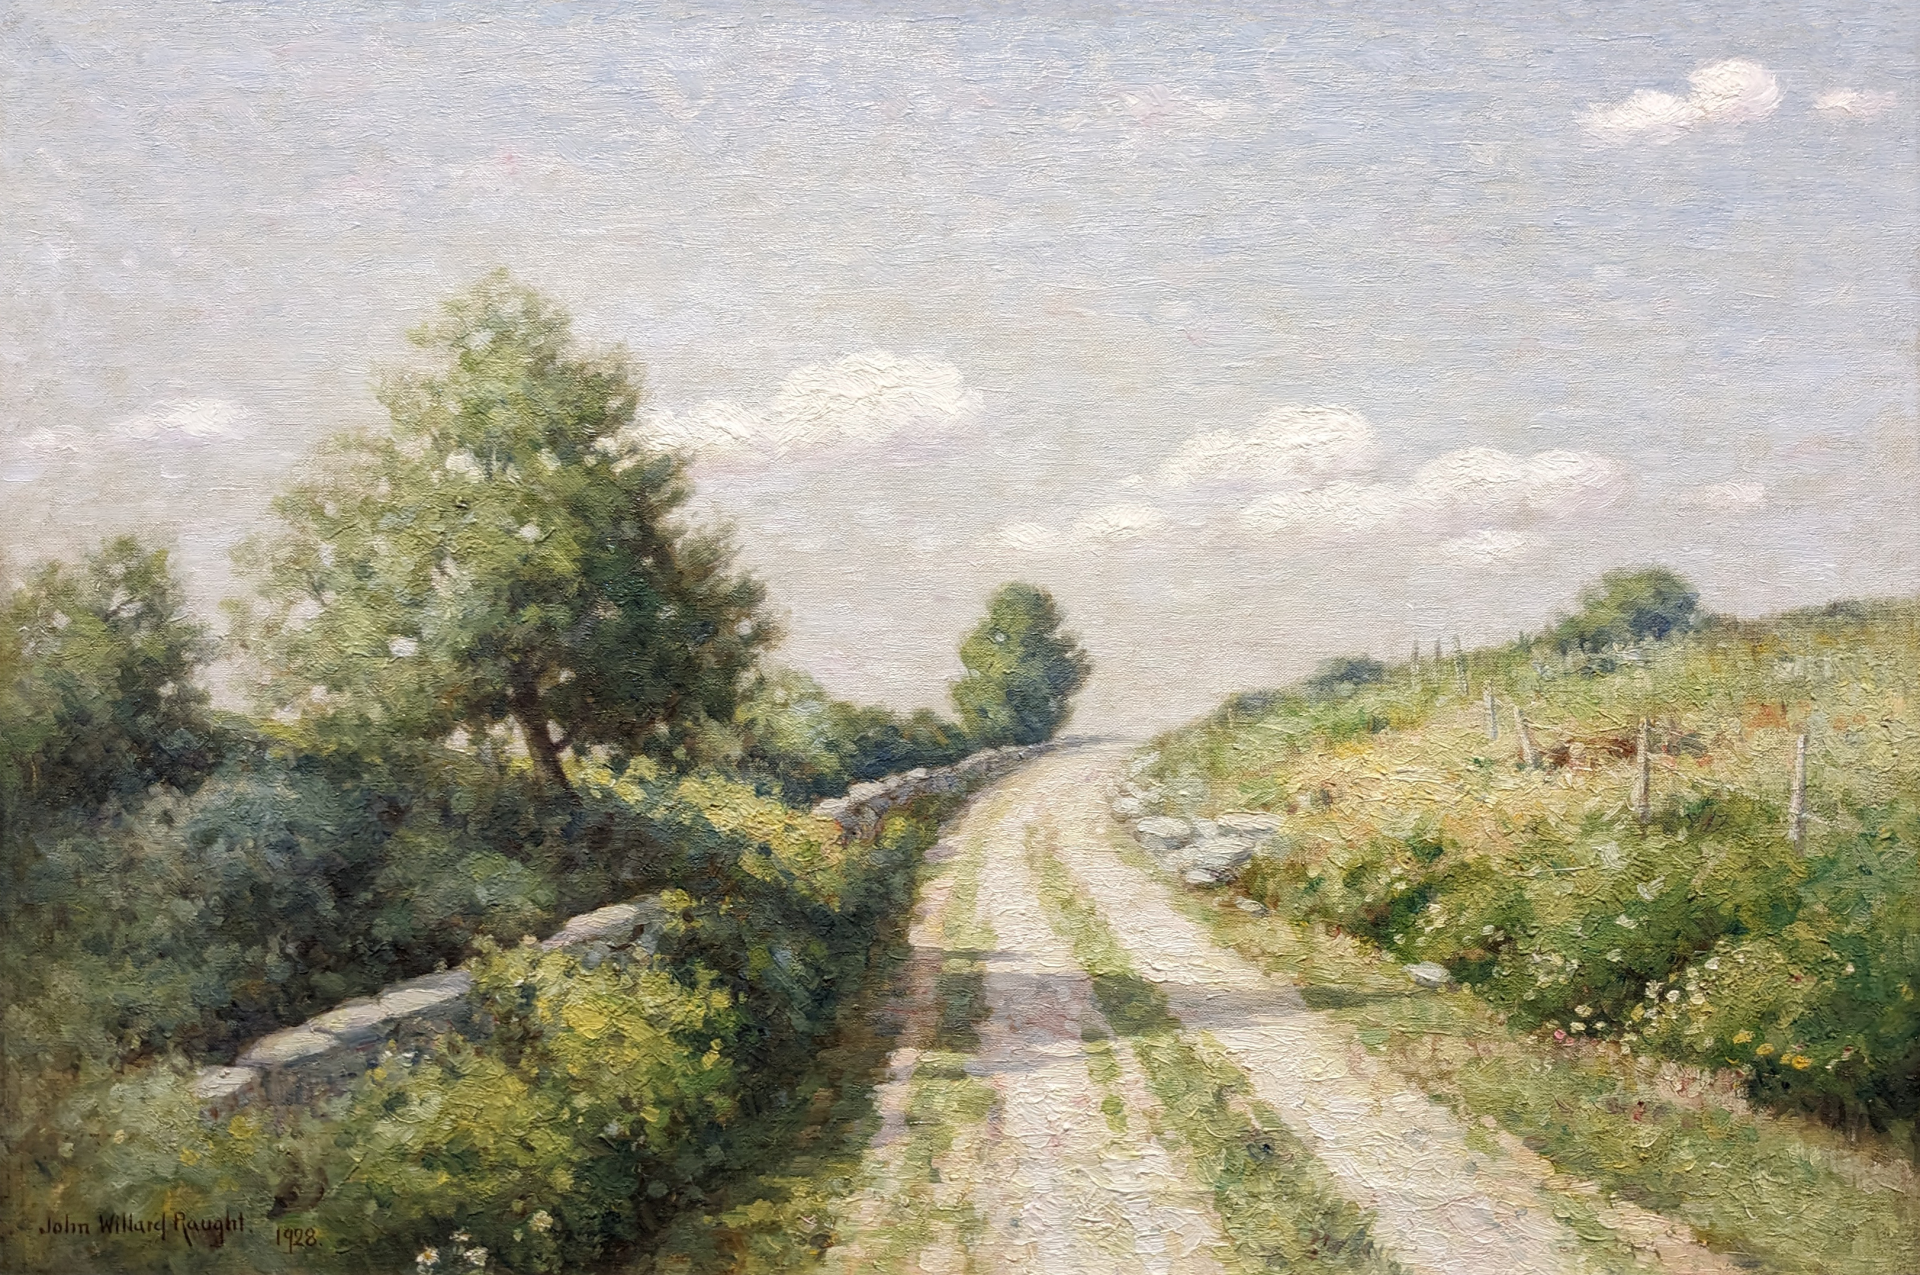 Landscape with Country Road 2020.2.3 John Willard Raught